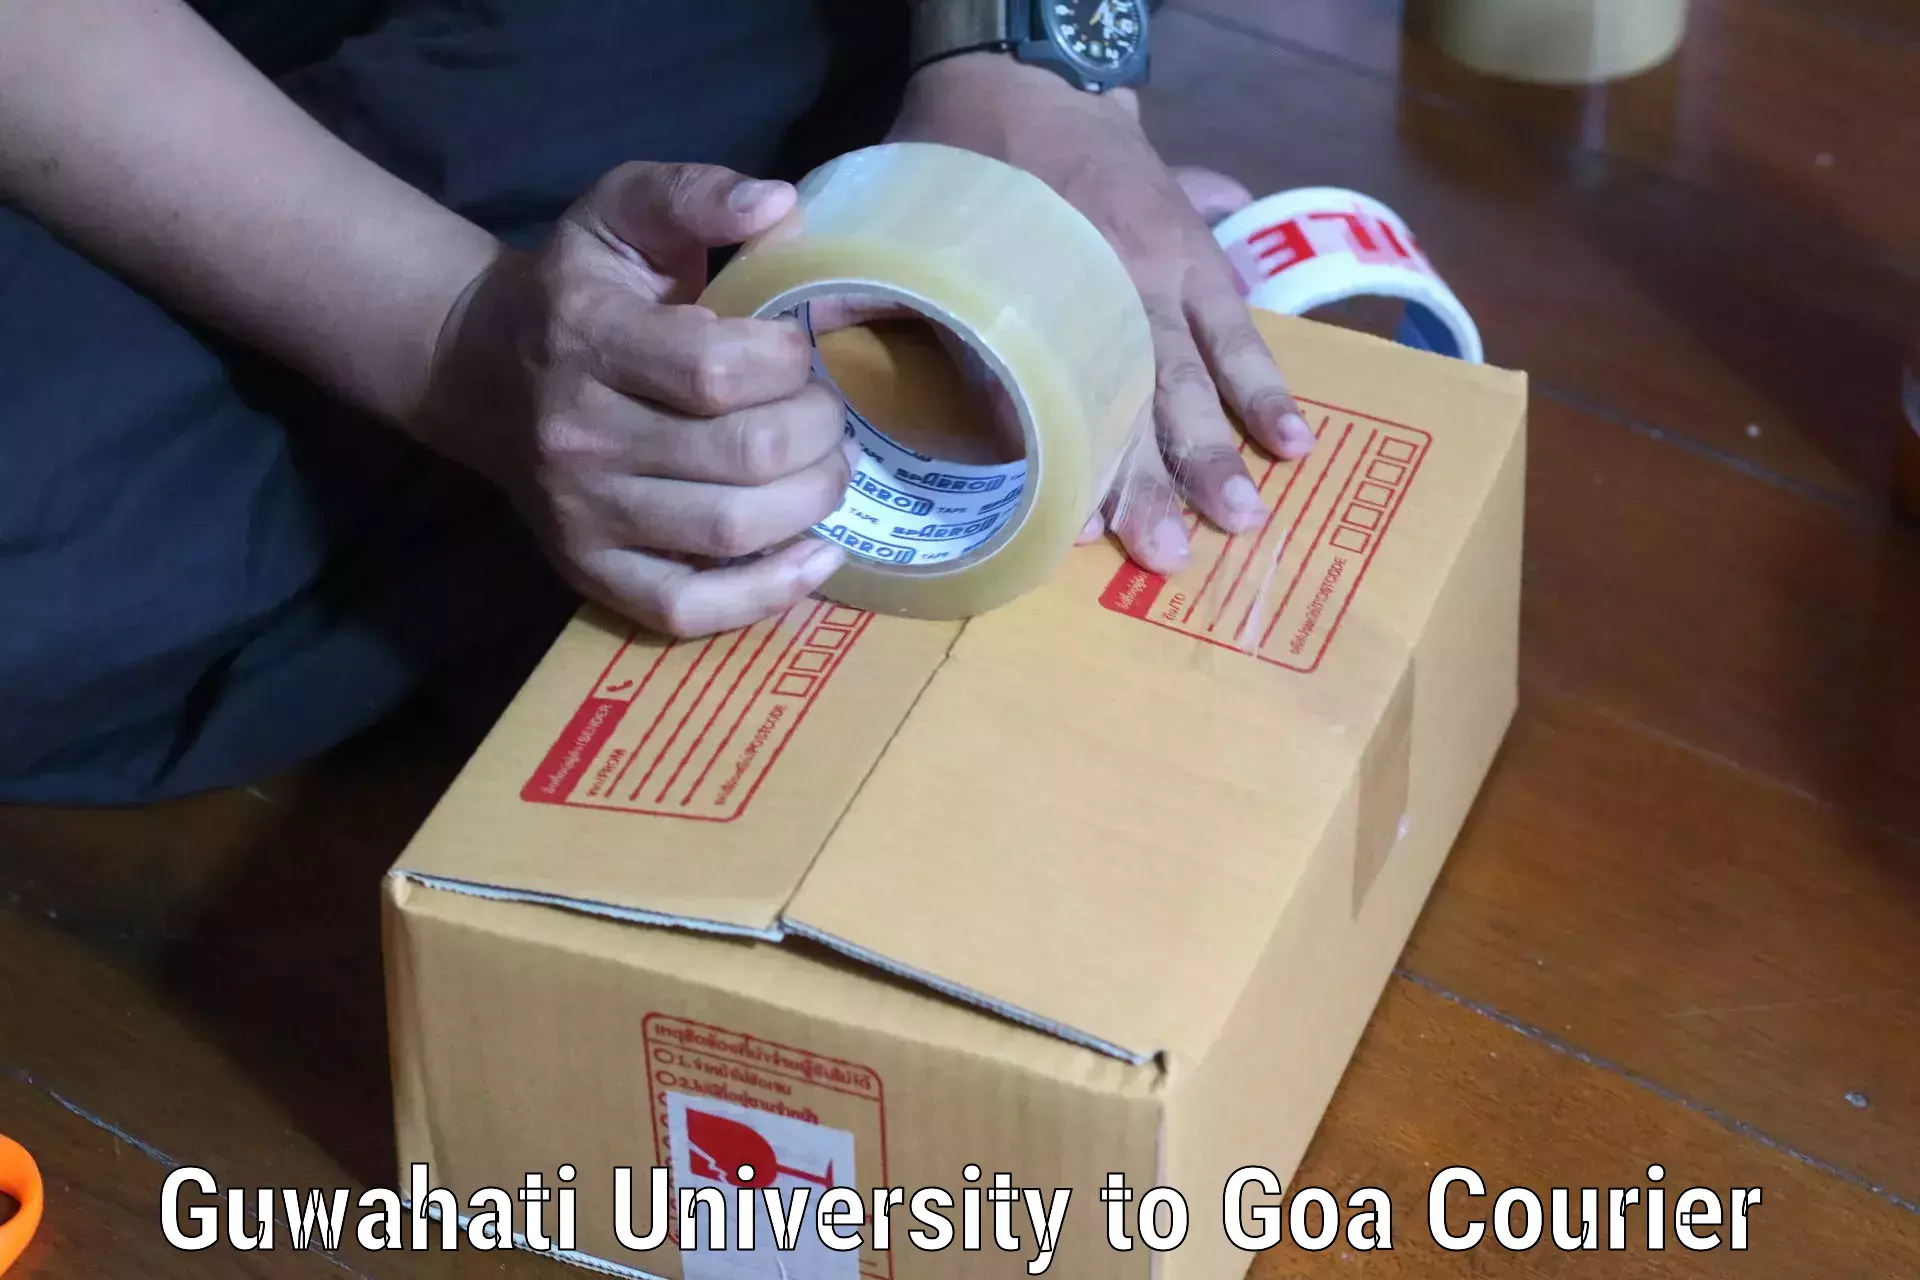 Commercial shipping rates in Guwahati University to Goa University